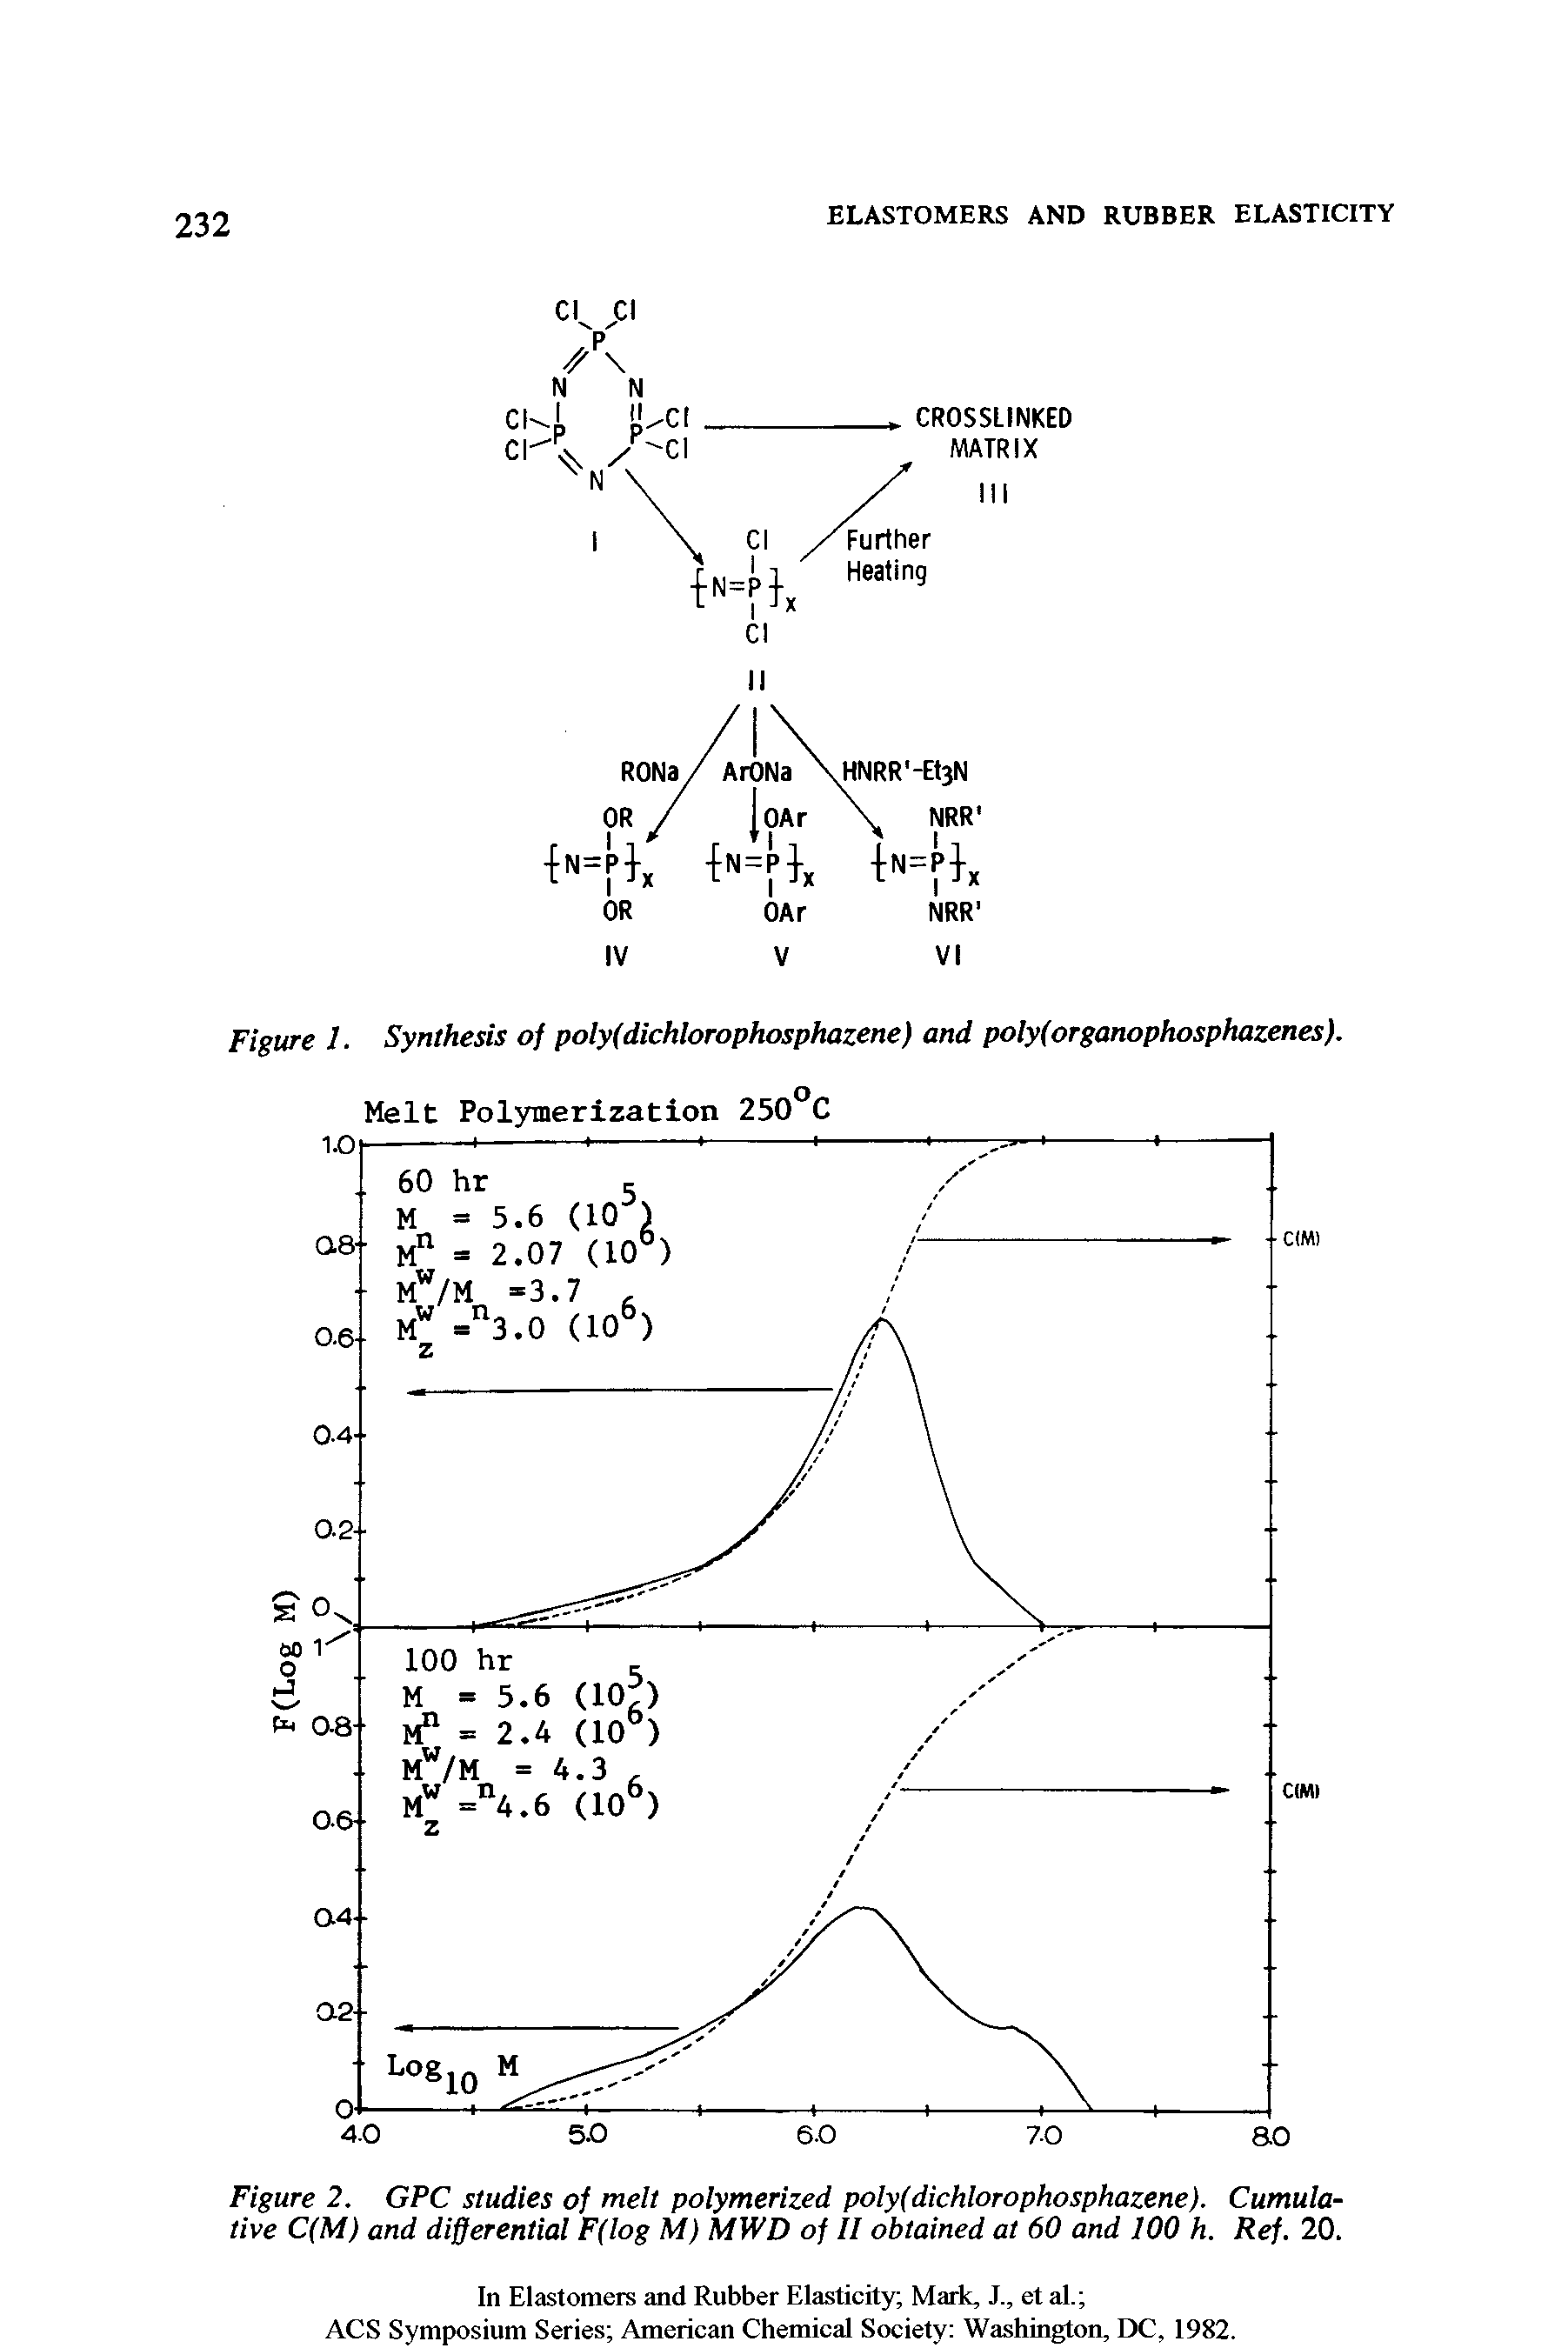 Figure 2. GPC studies of melt polymerized poly(dichlorophosphazene). Cumulative C(M) and differential F(log M) MWD of II obtained at 60 and 100 h. Ref. 20.